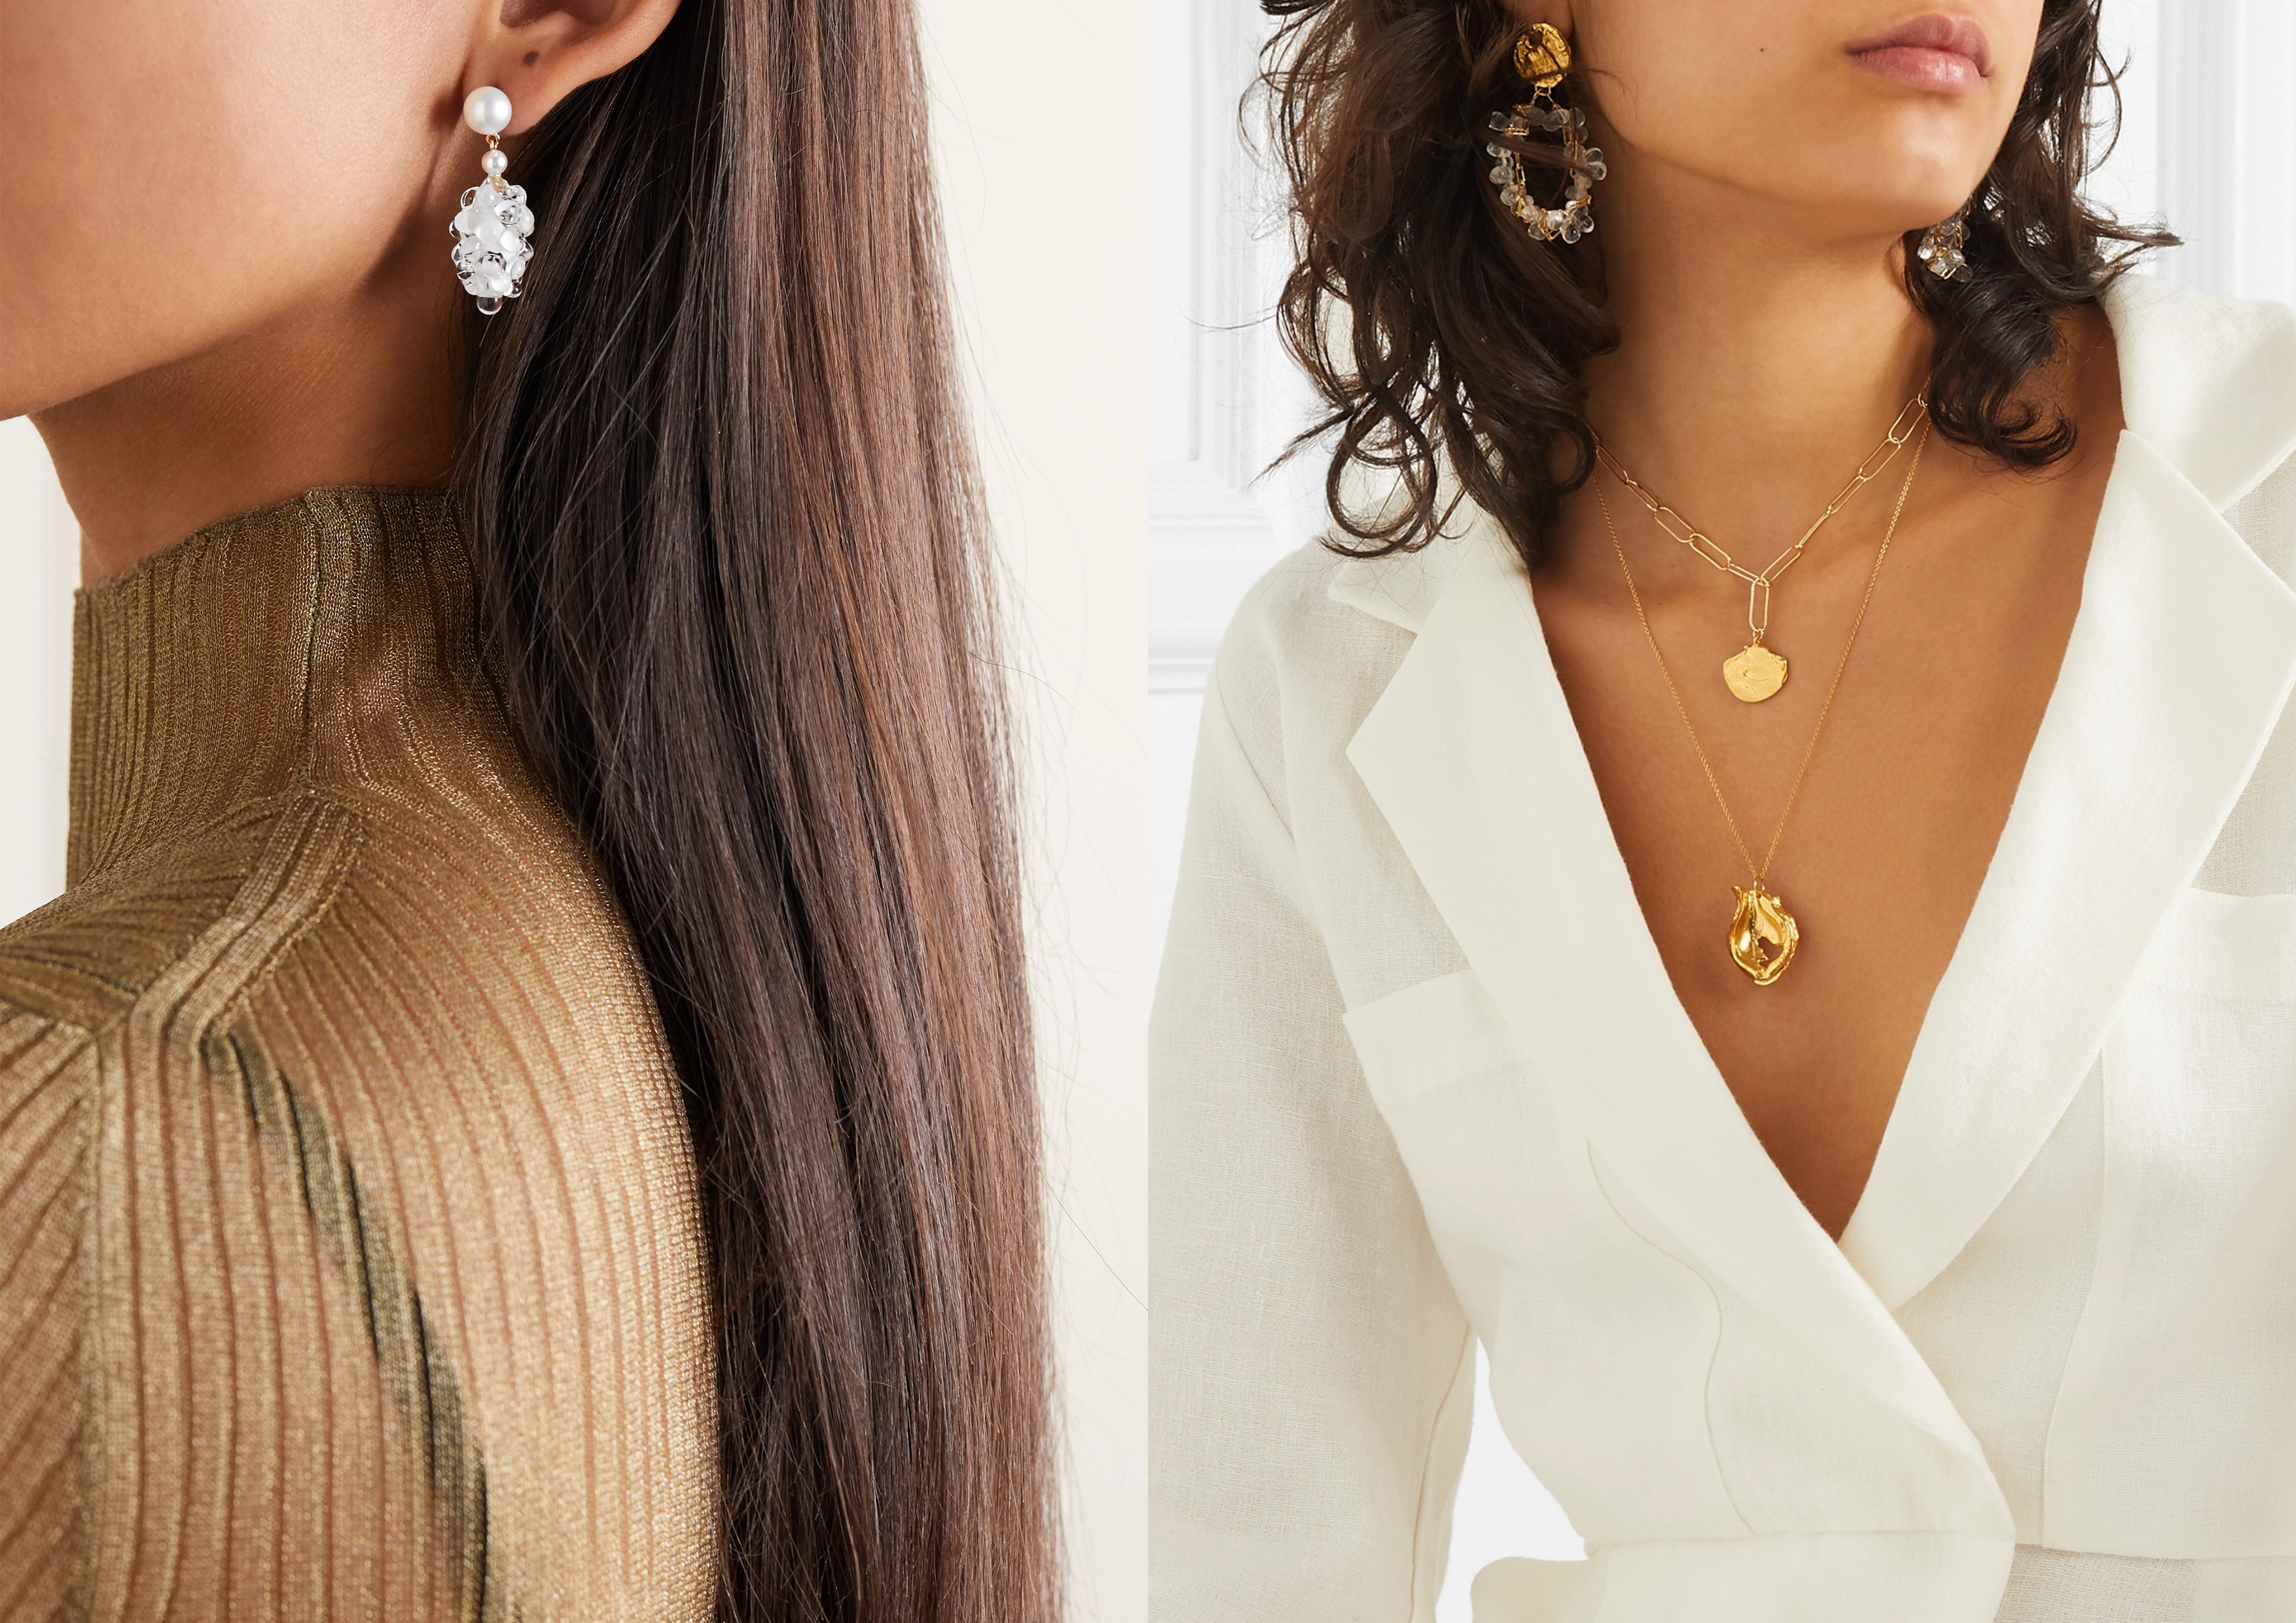 The 5 jewelry switch-ups you need to update your look